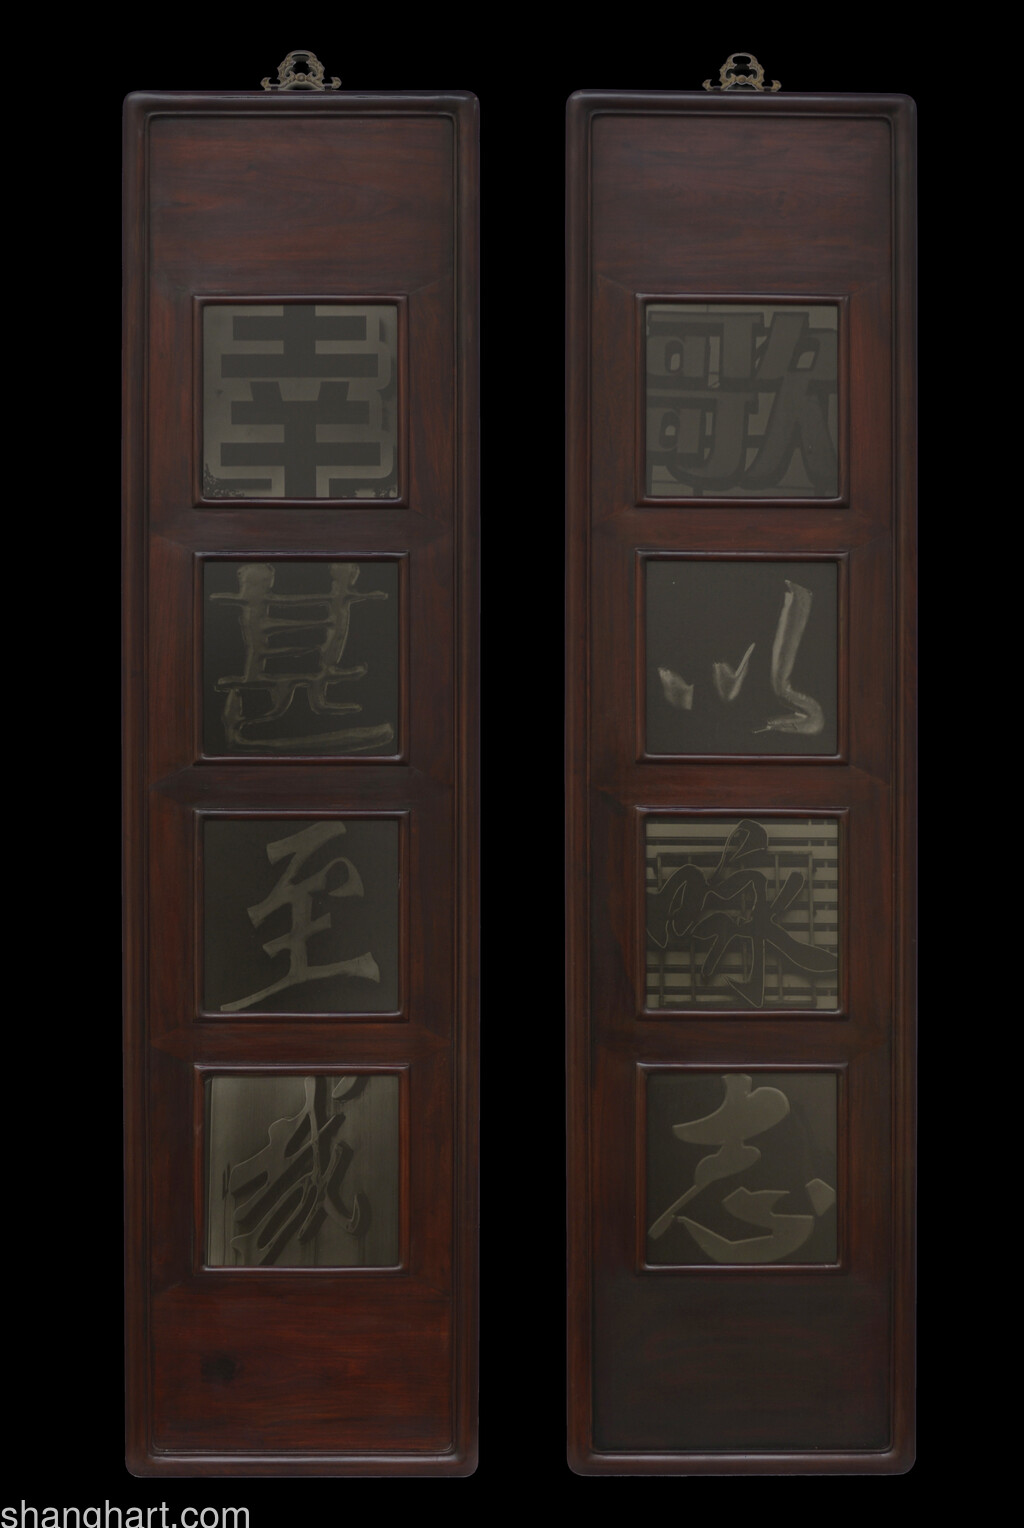 Poem from the Han Dynasty (a pair of tablets)